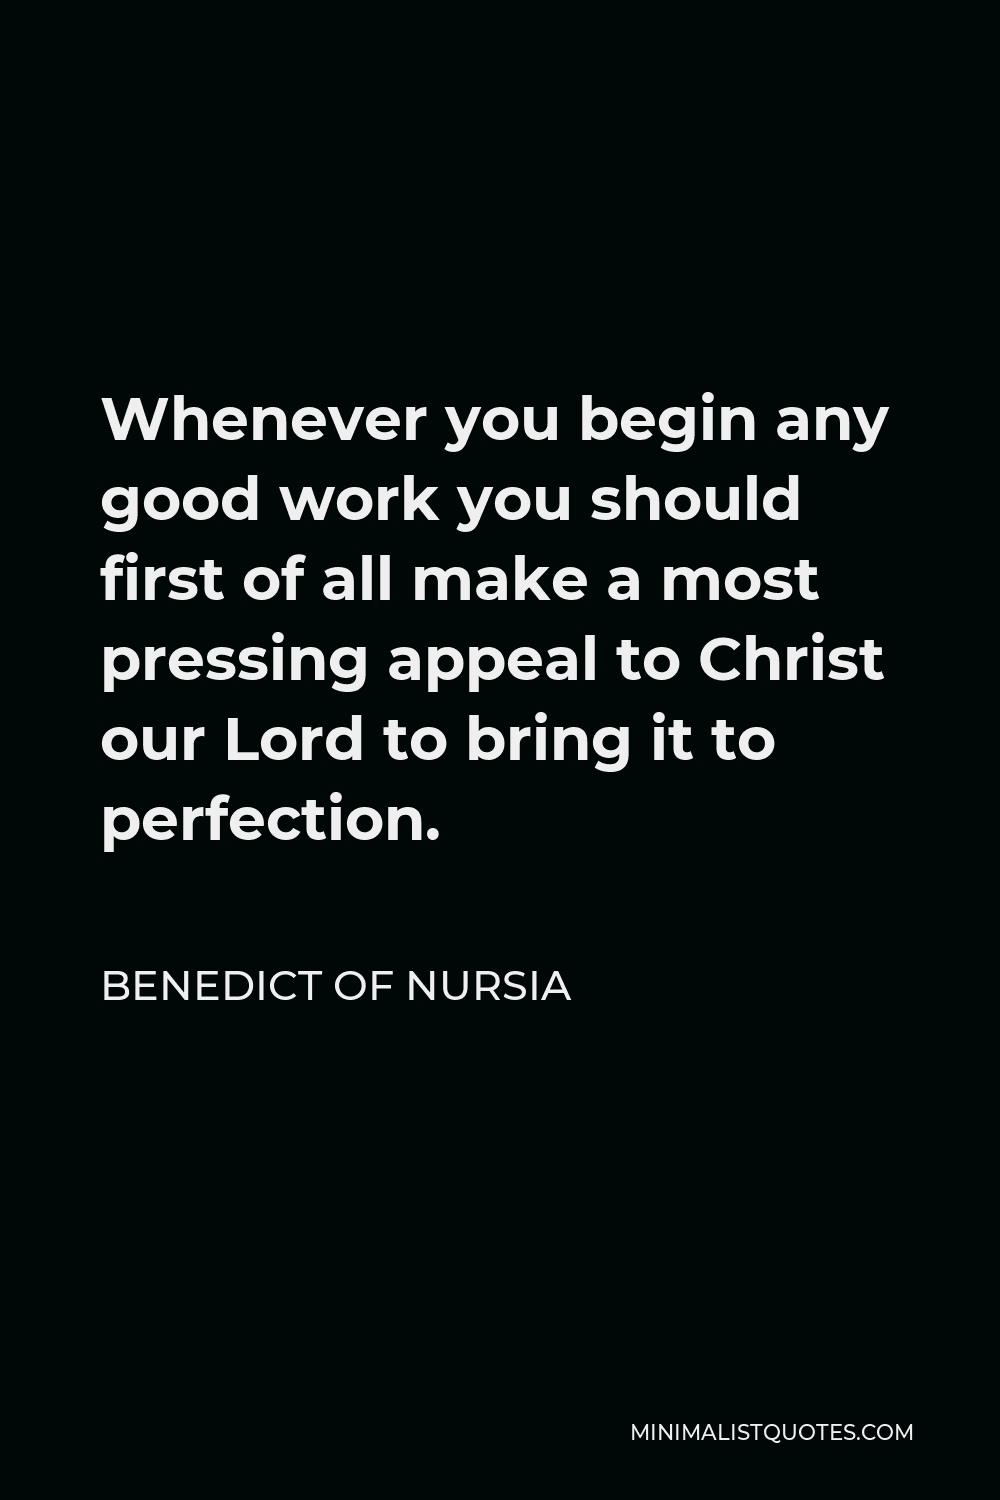 Benedict of Nursia Quote - Whenever you begin any good work you should first of all make a most pressing appeal to Christ our Lord to bring it to perfection.